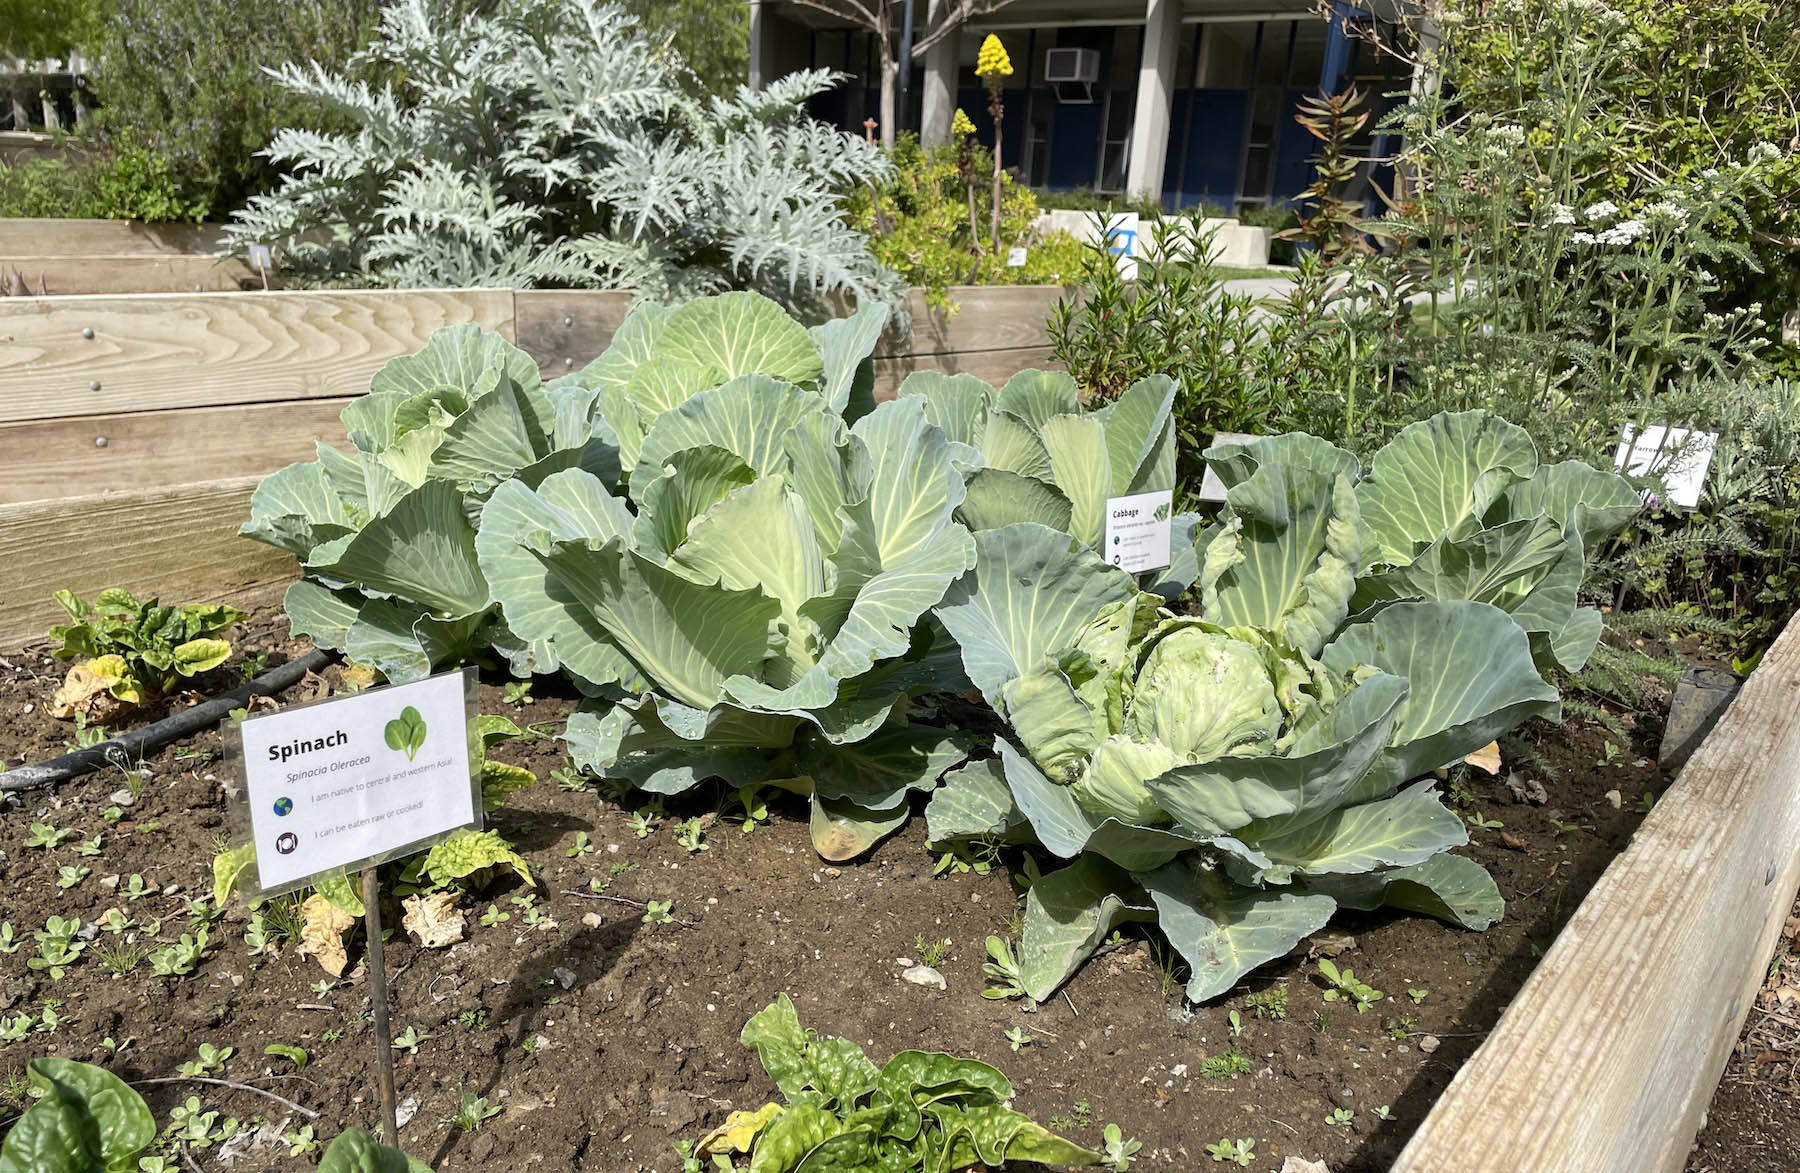 Cabbage and spinach growing in a small plot